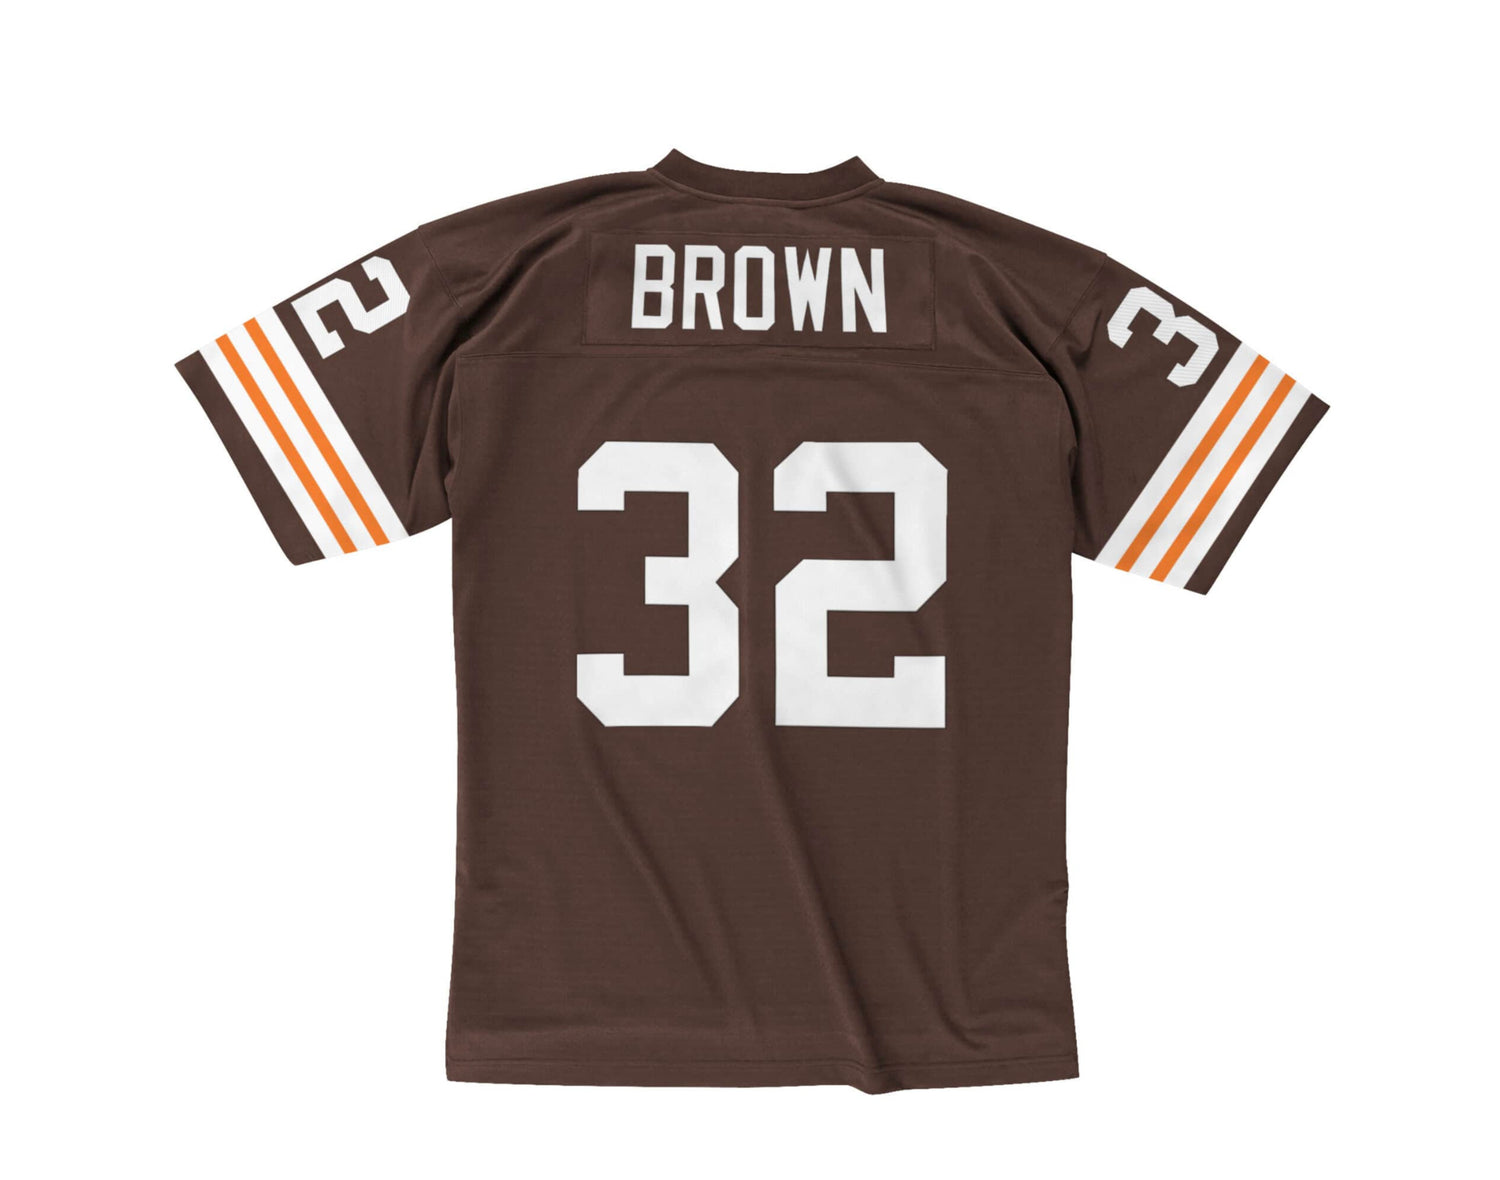 Mitchell & Ness Legacy Cleveland Browns 1963 Jim Brown Jersey